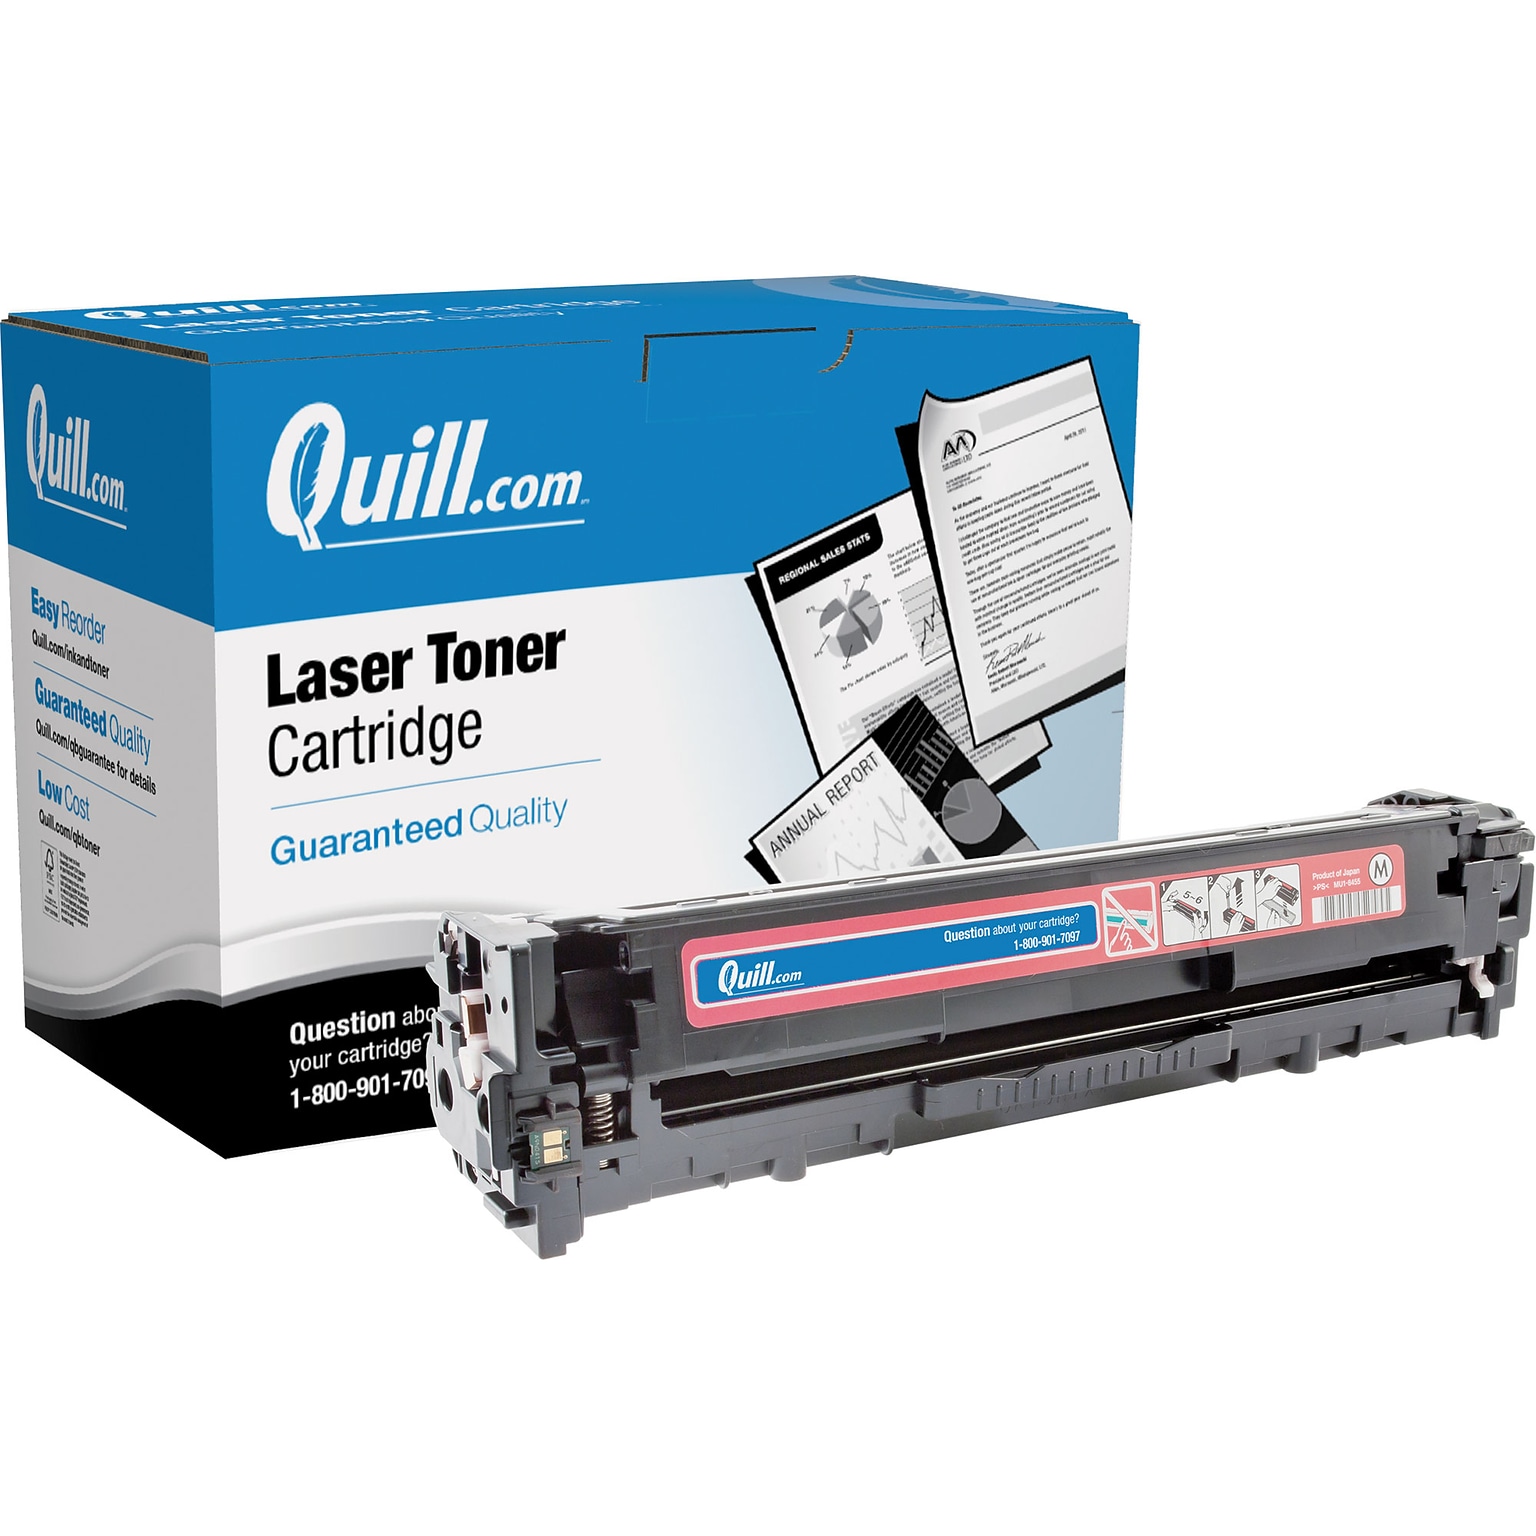 Quill Brand Remanufactured HP 128A (CE323A) Magenta Laser Toner Cartridge (100% Satisfaction Guaranteed)